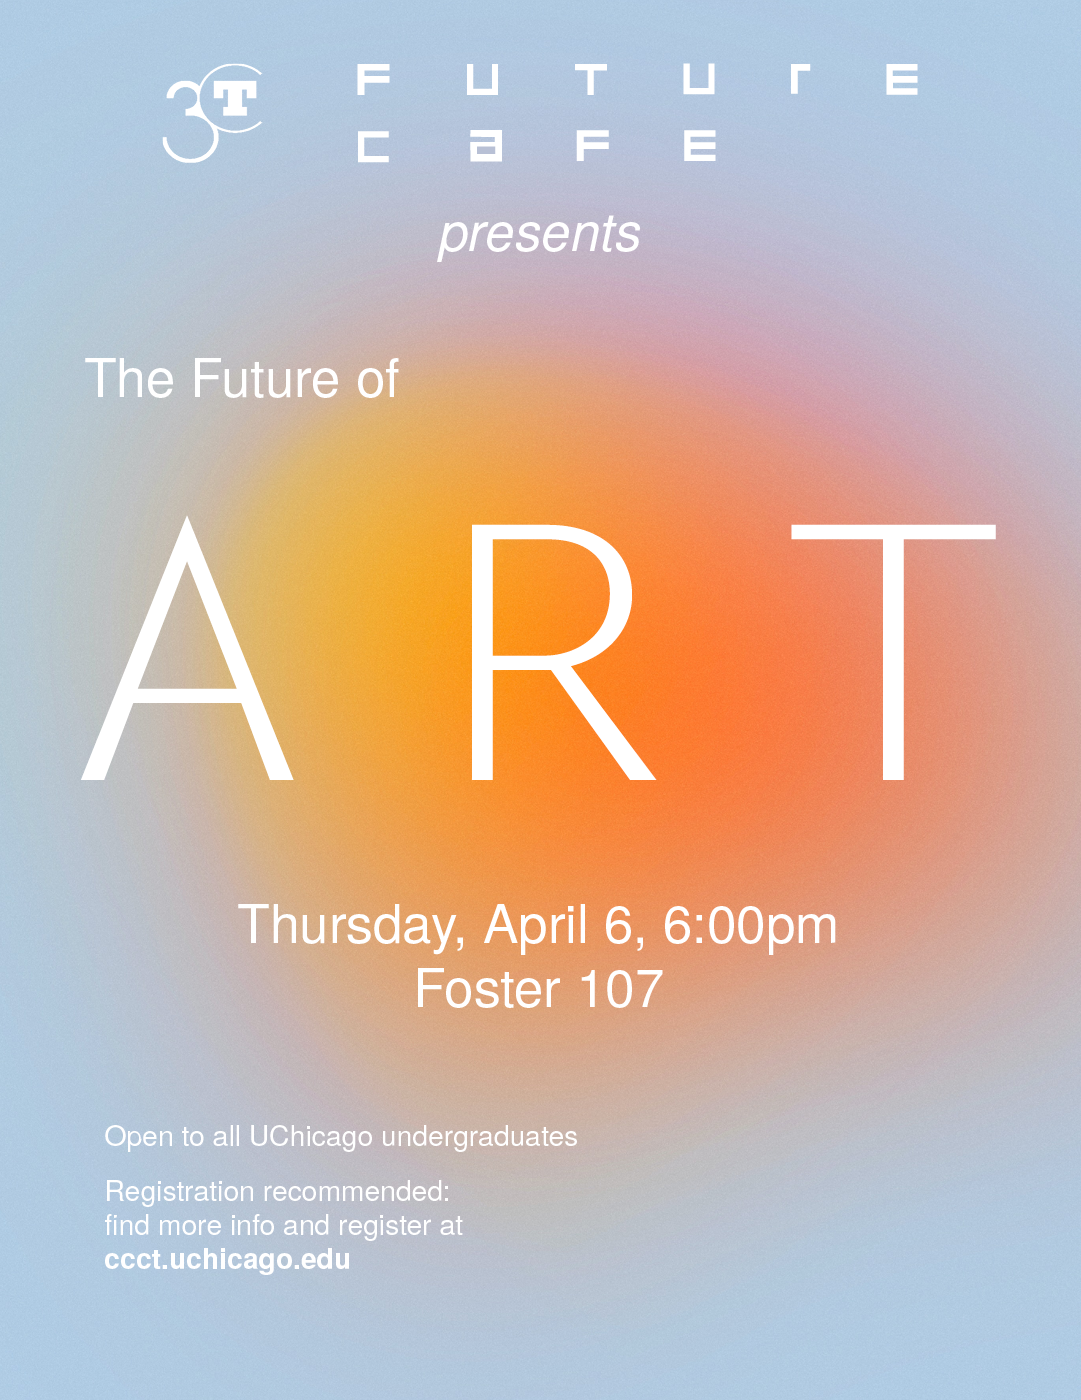 event poster with white text against blurry yellow-orange circle and a pale blue background